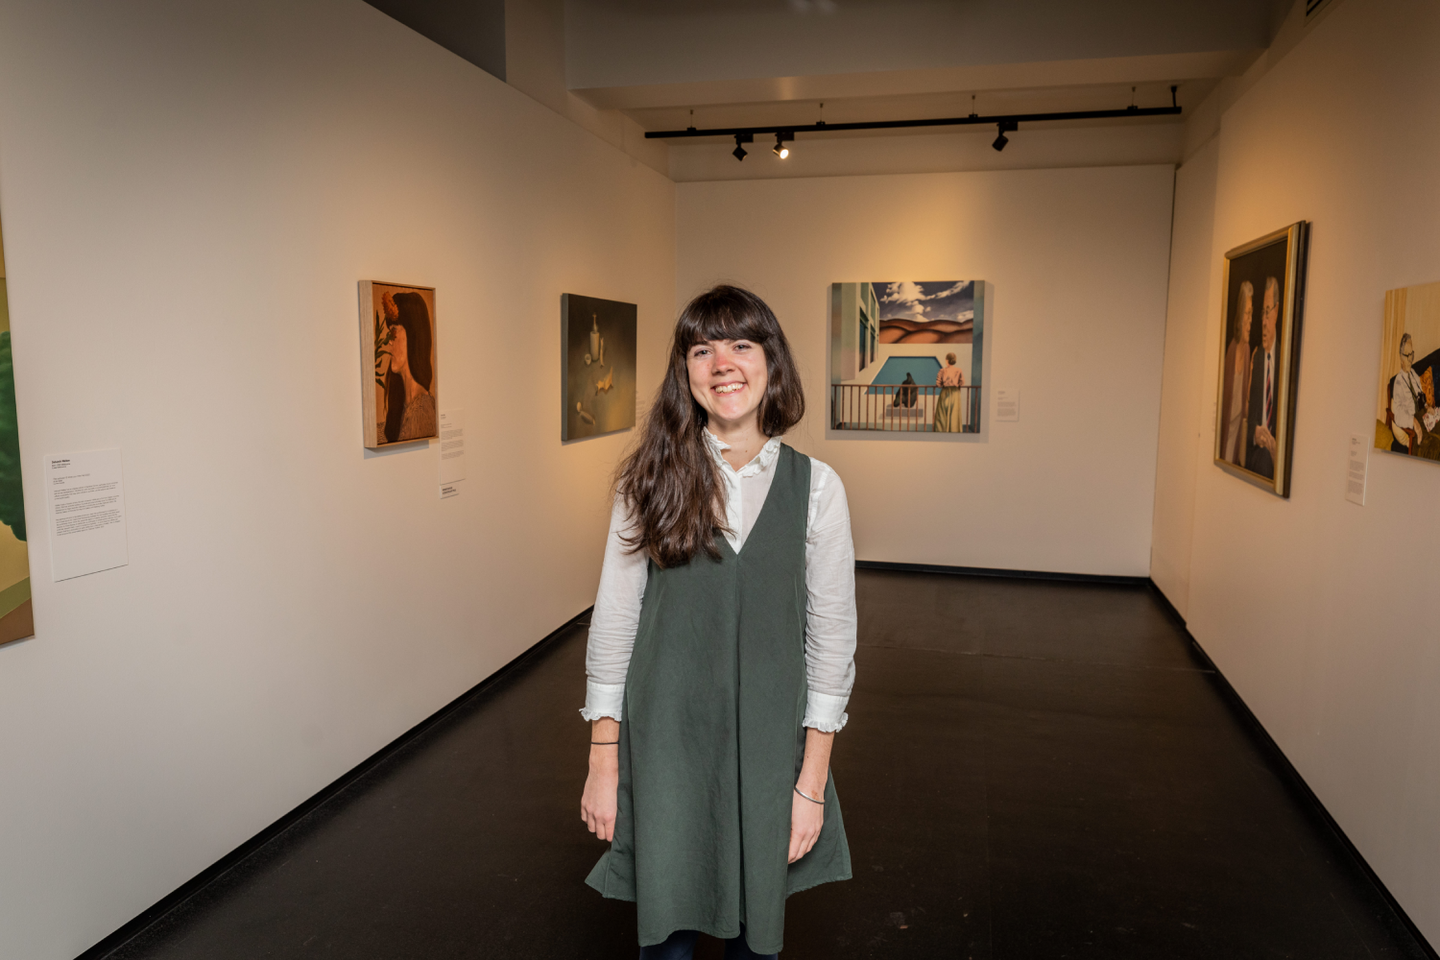 Woman with brown hair smiling in front of gallery filled with paintings